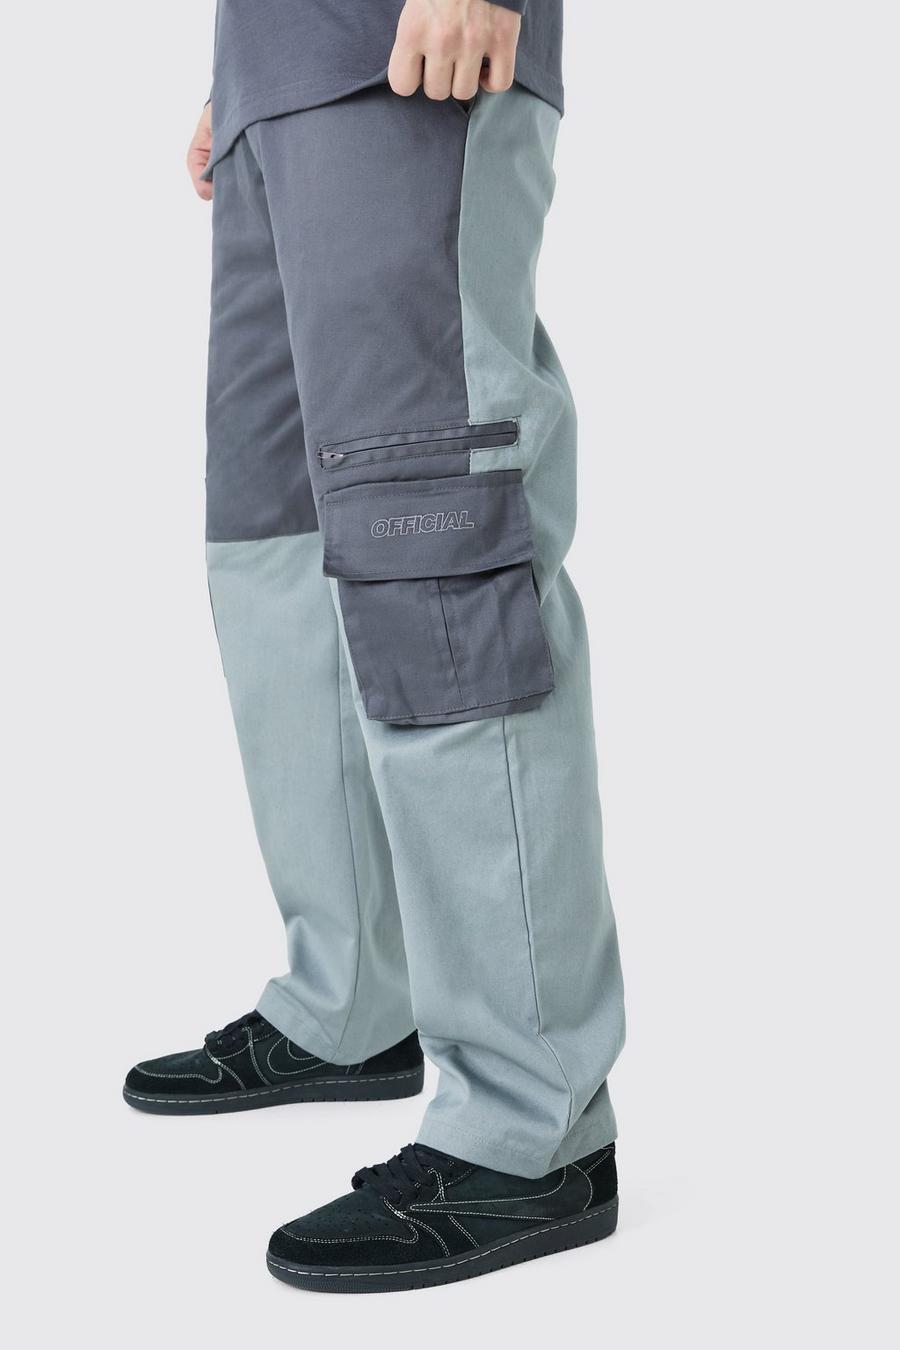 Charcoal grey Tall Relaxed Fit Colour Block Official Branded Cargo Trouser